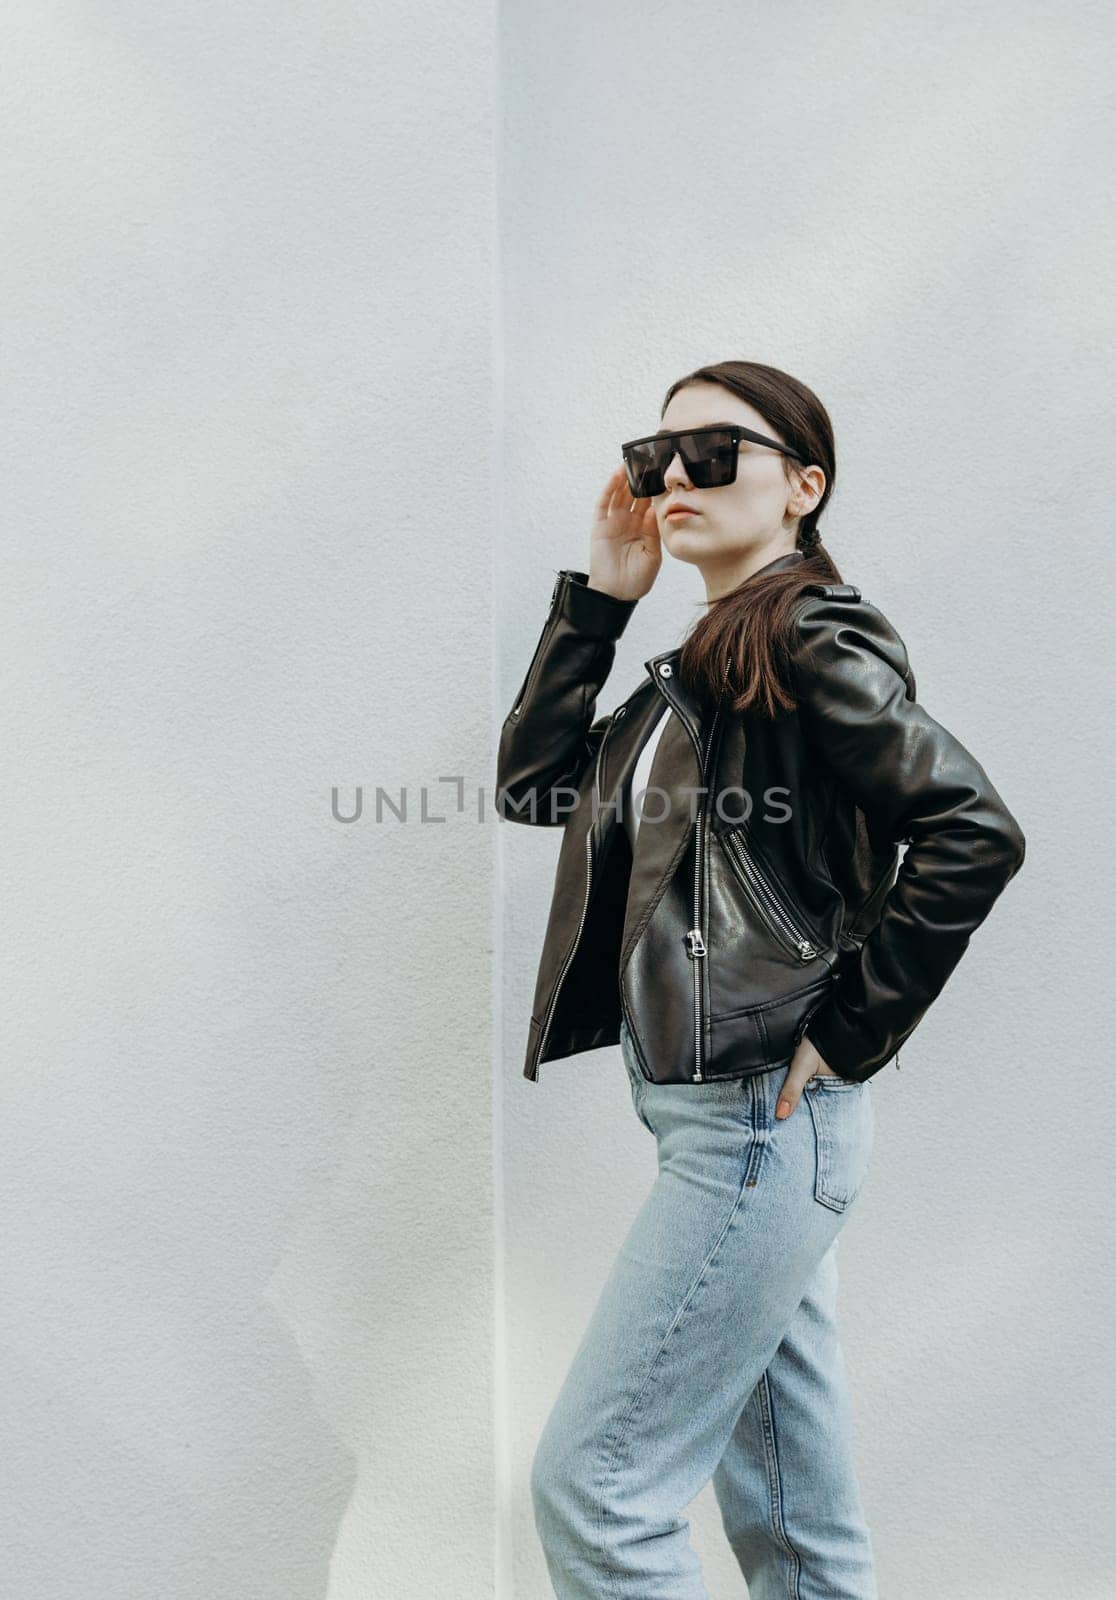 Portrait of one young beautiful Caucasian girl in sunglasses, leather jacket and blue jeans standing sideways and posing to the right near a white wall on a spring day with copy space on the left, close-up bottom view.